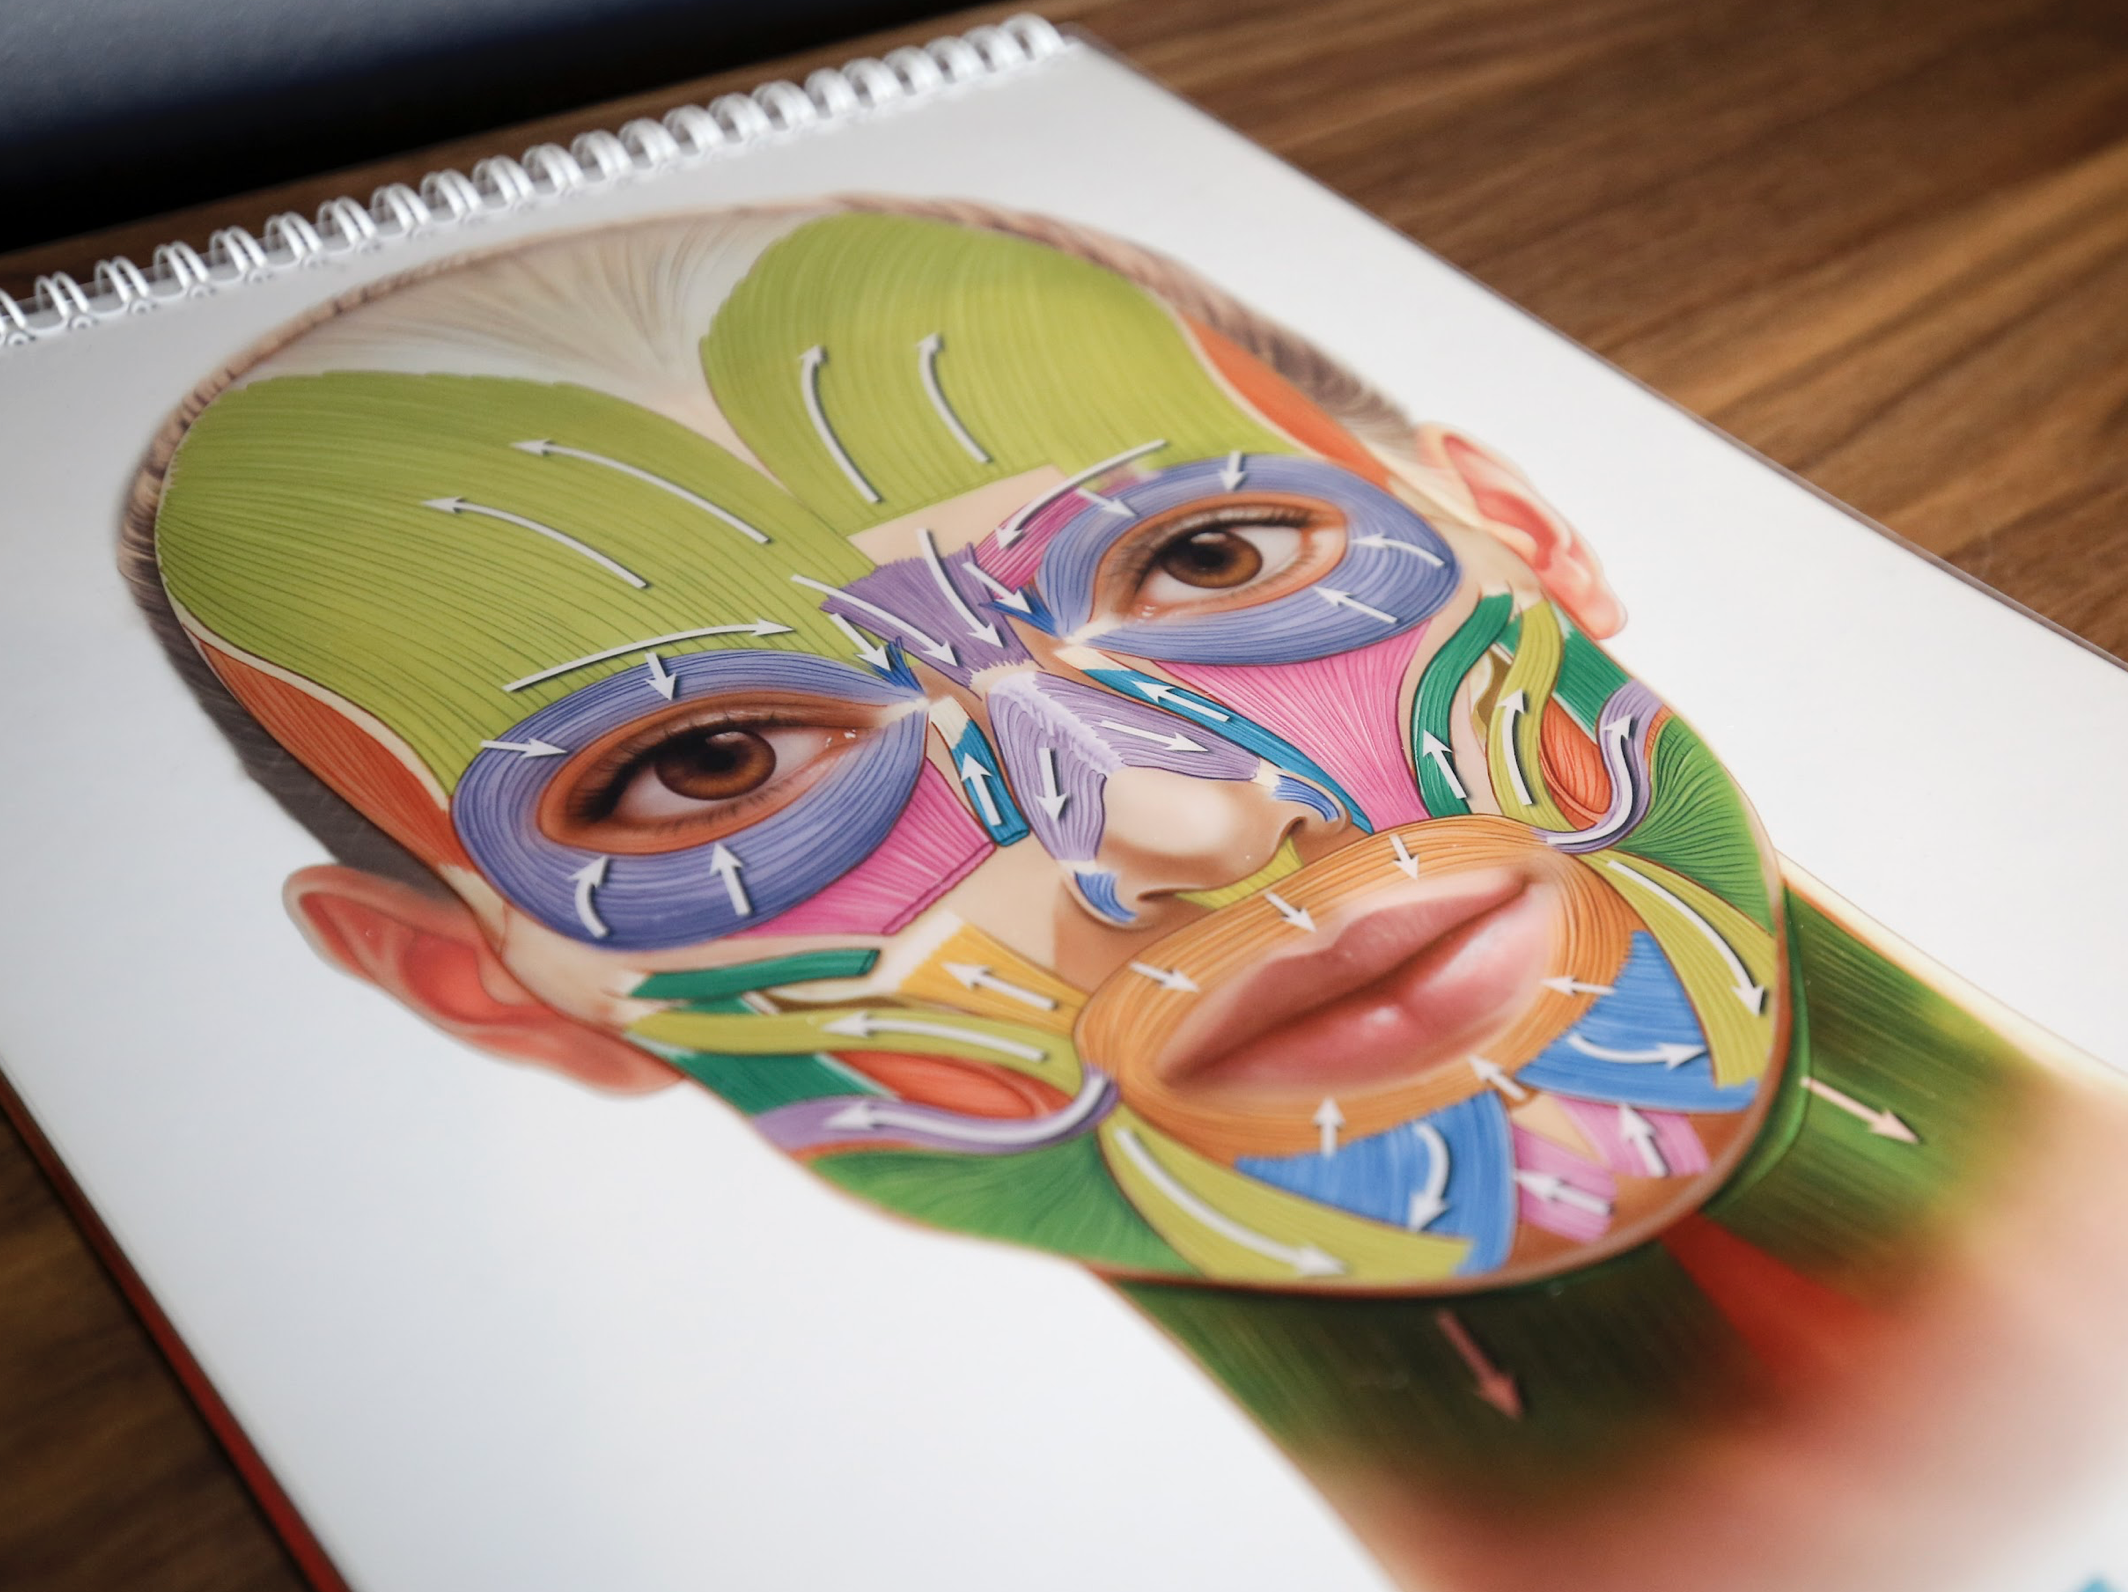 A colorful, detailed sketch of a human face with collagen-stimulating injections, divided into multiple sections with various patterns, displayed in a spiral notebook on a wooden table.